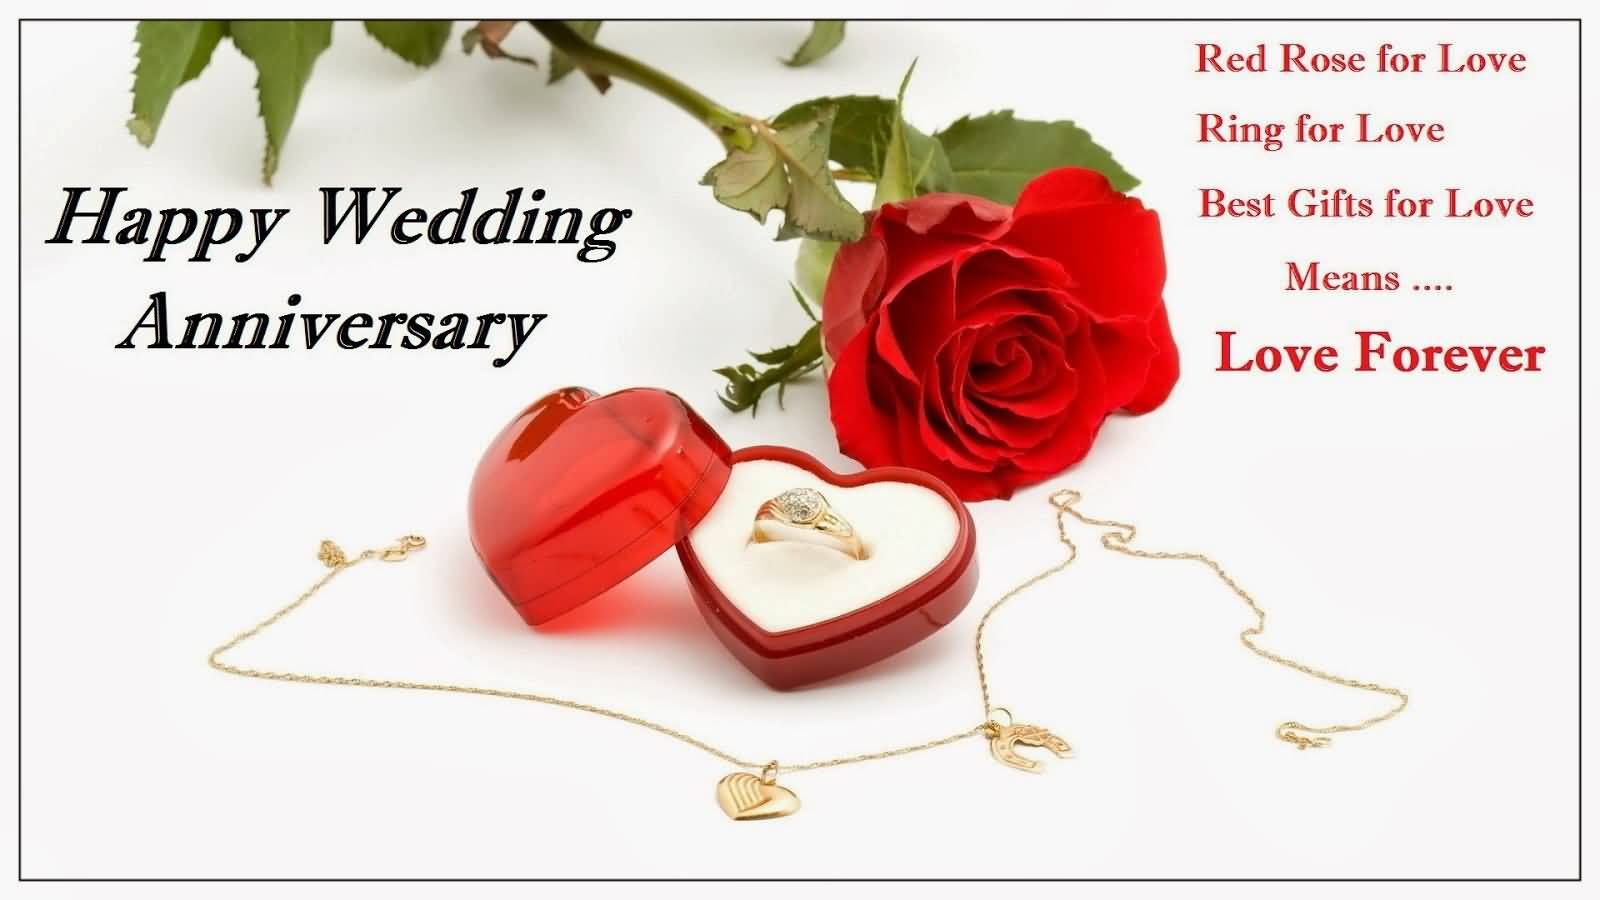 Wedding Wishes Images Free Download Happy Wedding Anniversary Red